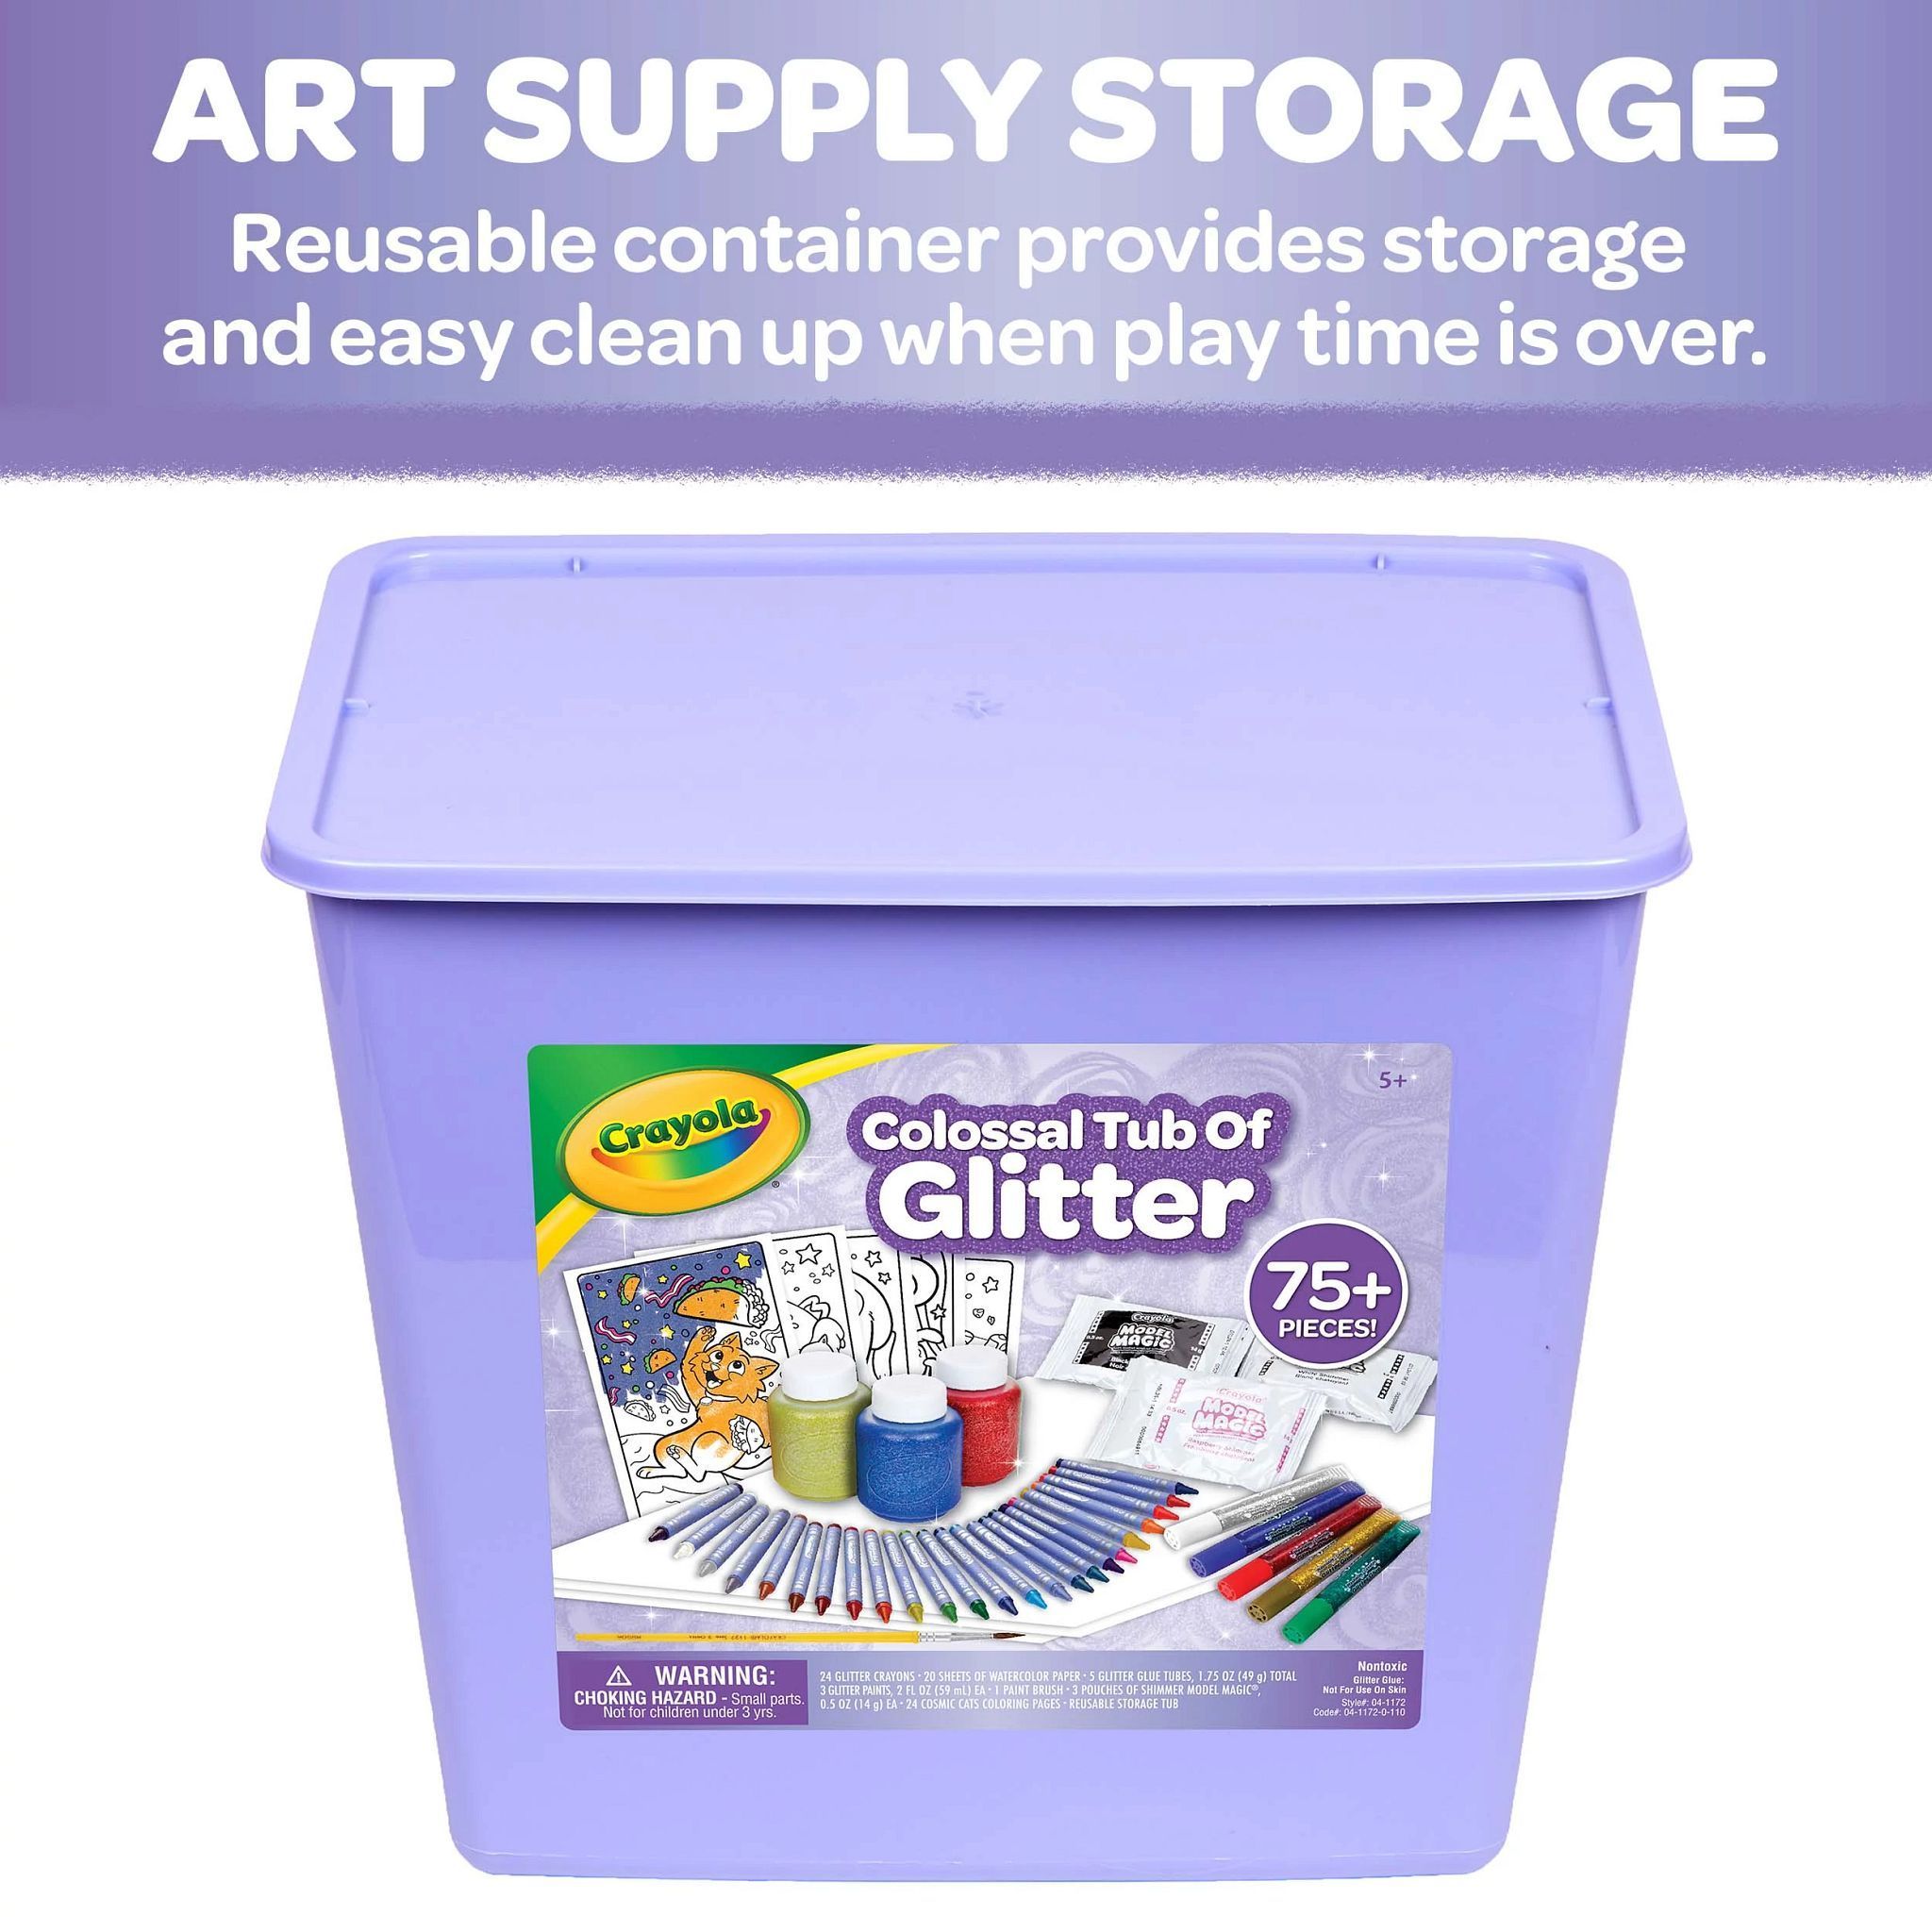 Crayola Glitter Arts and Crafts Kit, 80+ School Supplies, Glitter Toy, Creative Gift for Unisex Child - image 3 of 6